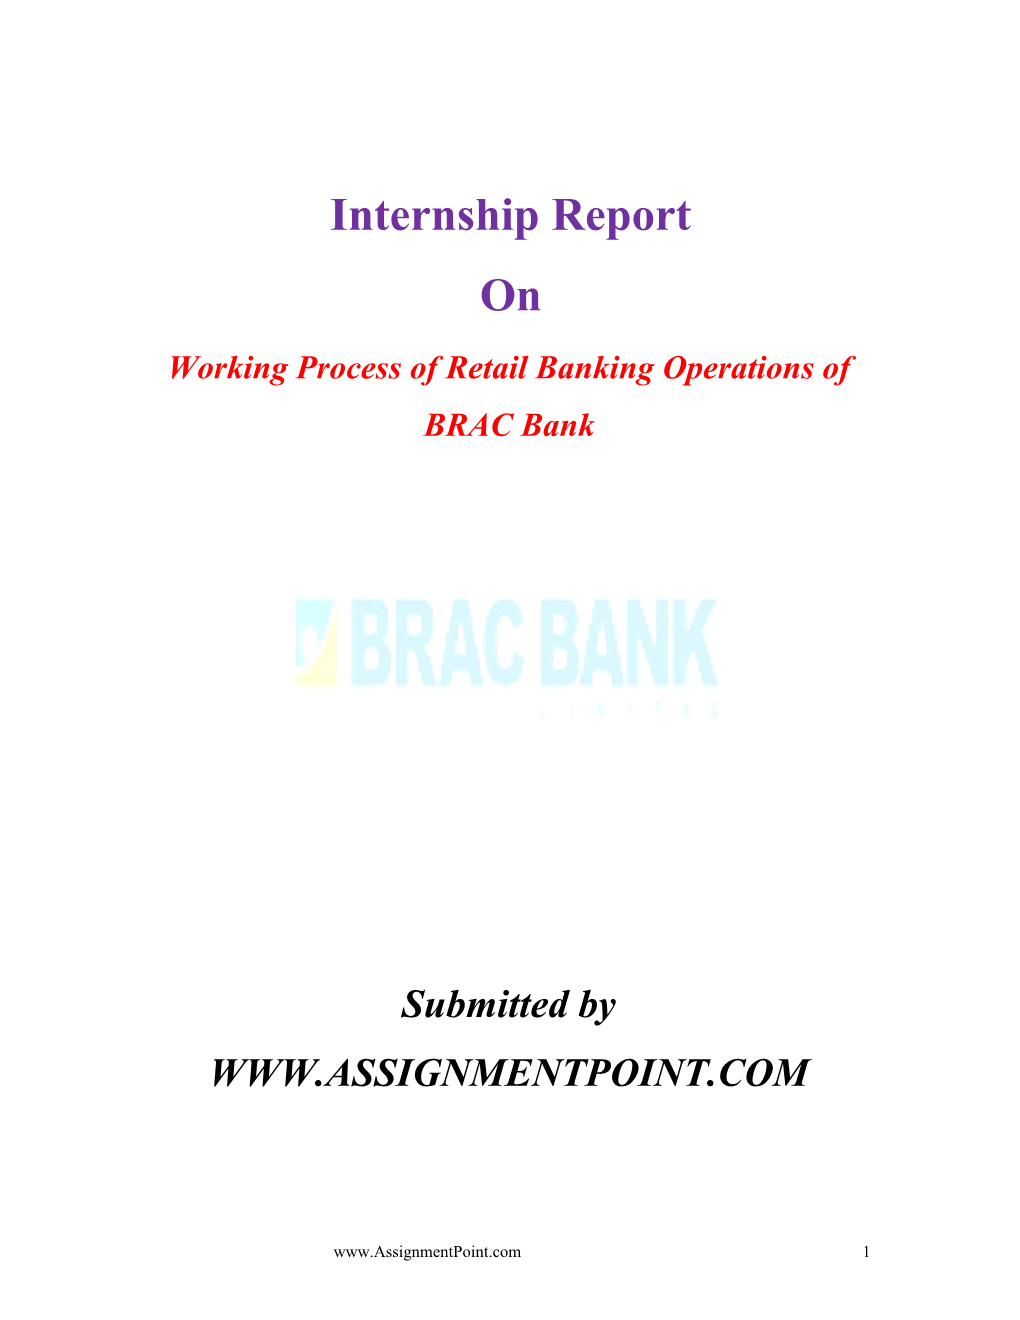 Working Process of Retail Banking Operations of BRAC Bank